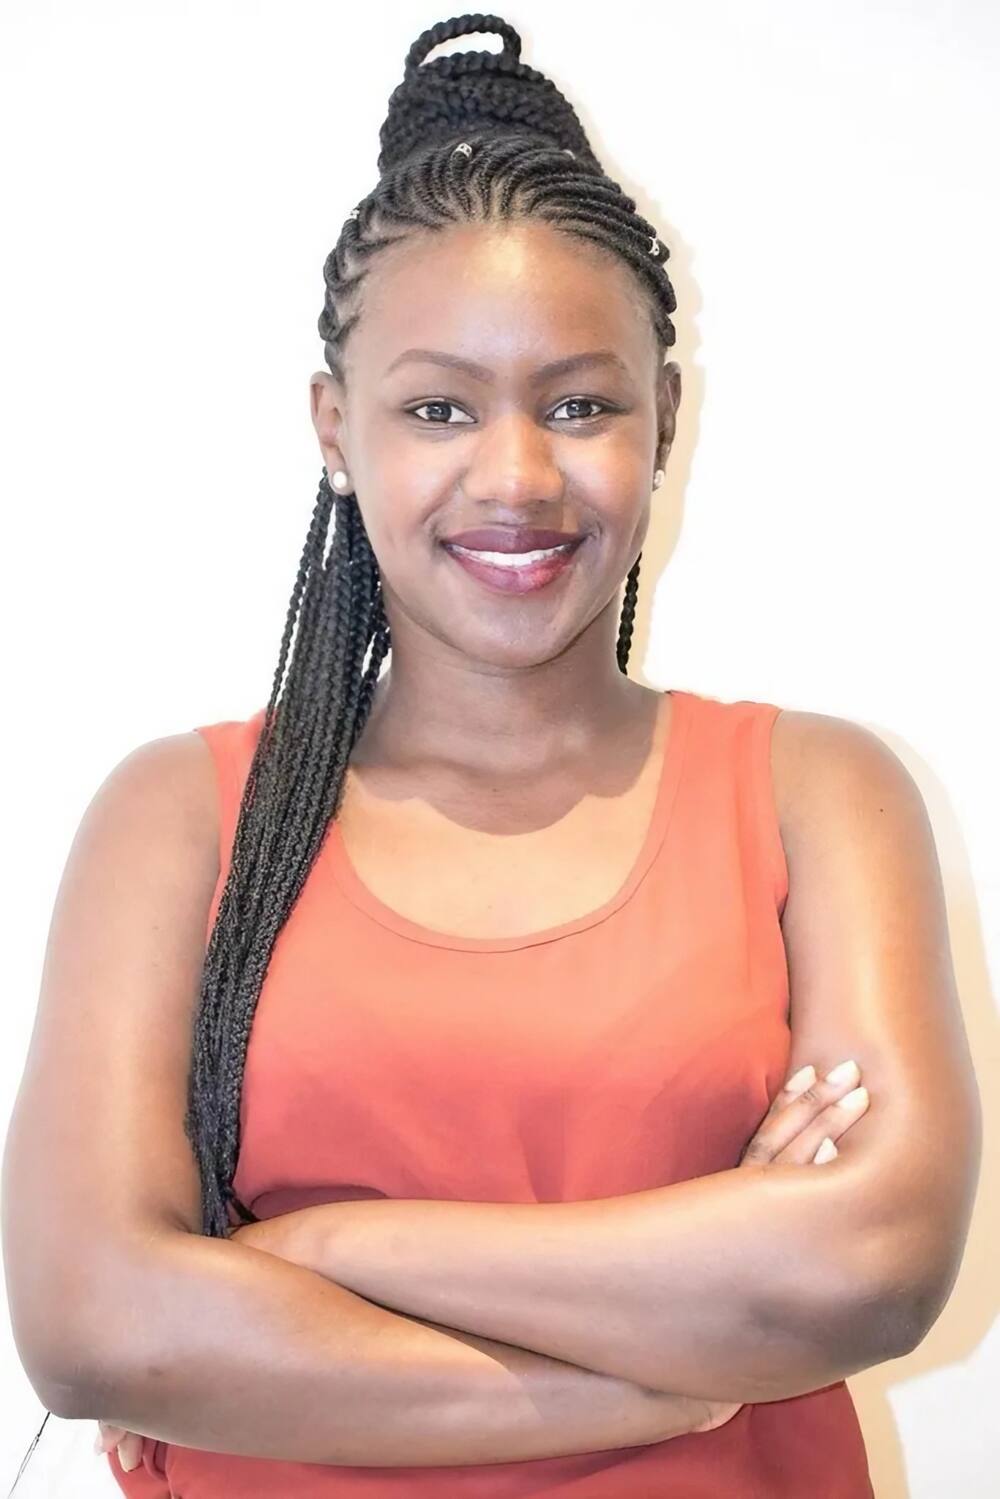 Shirlene Nafula was featured in Forbes 30 under 30.